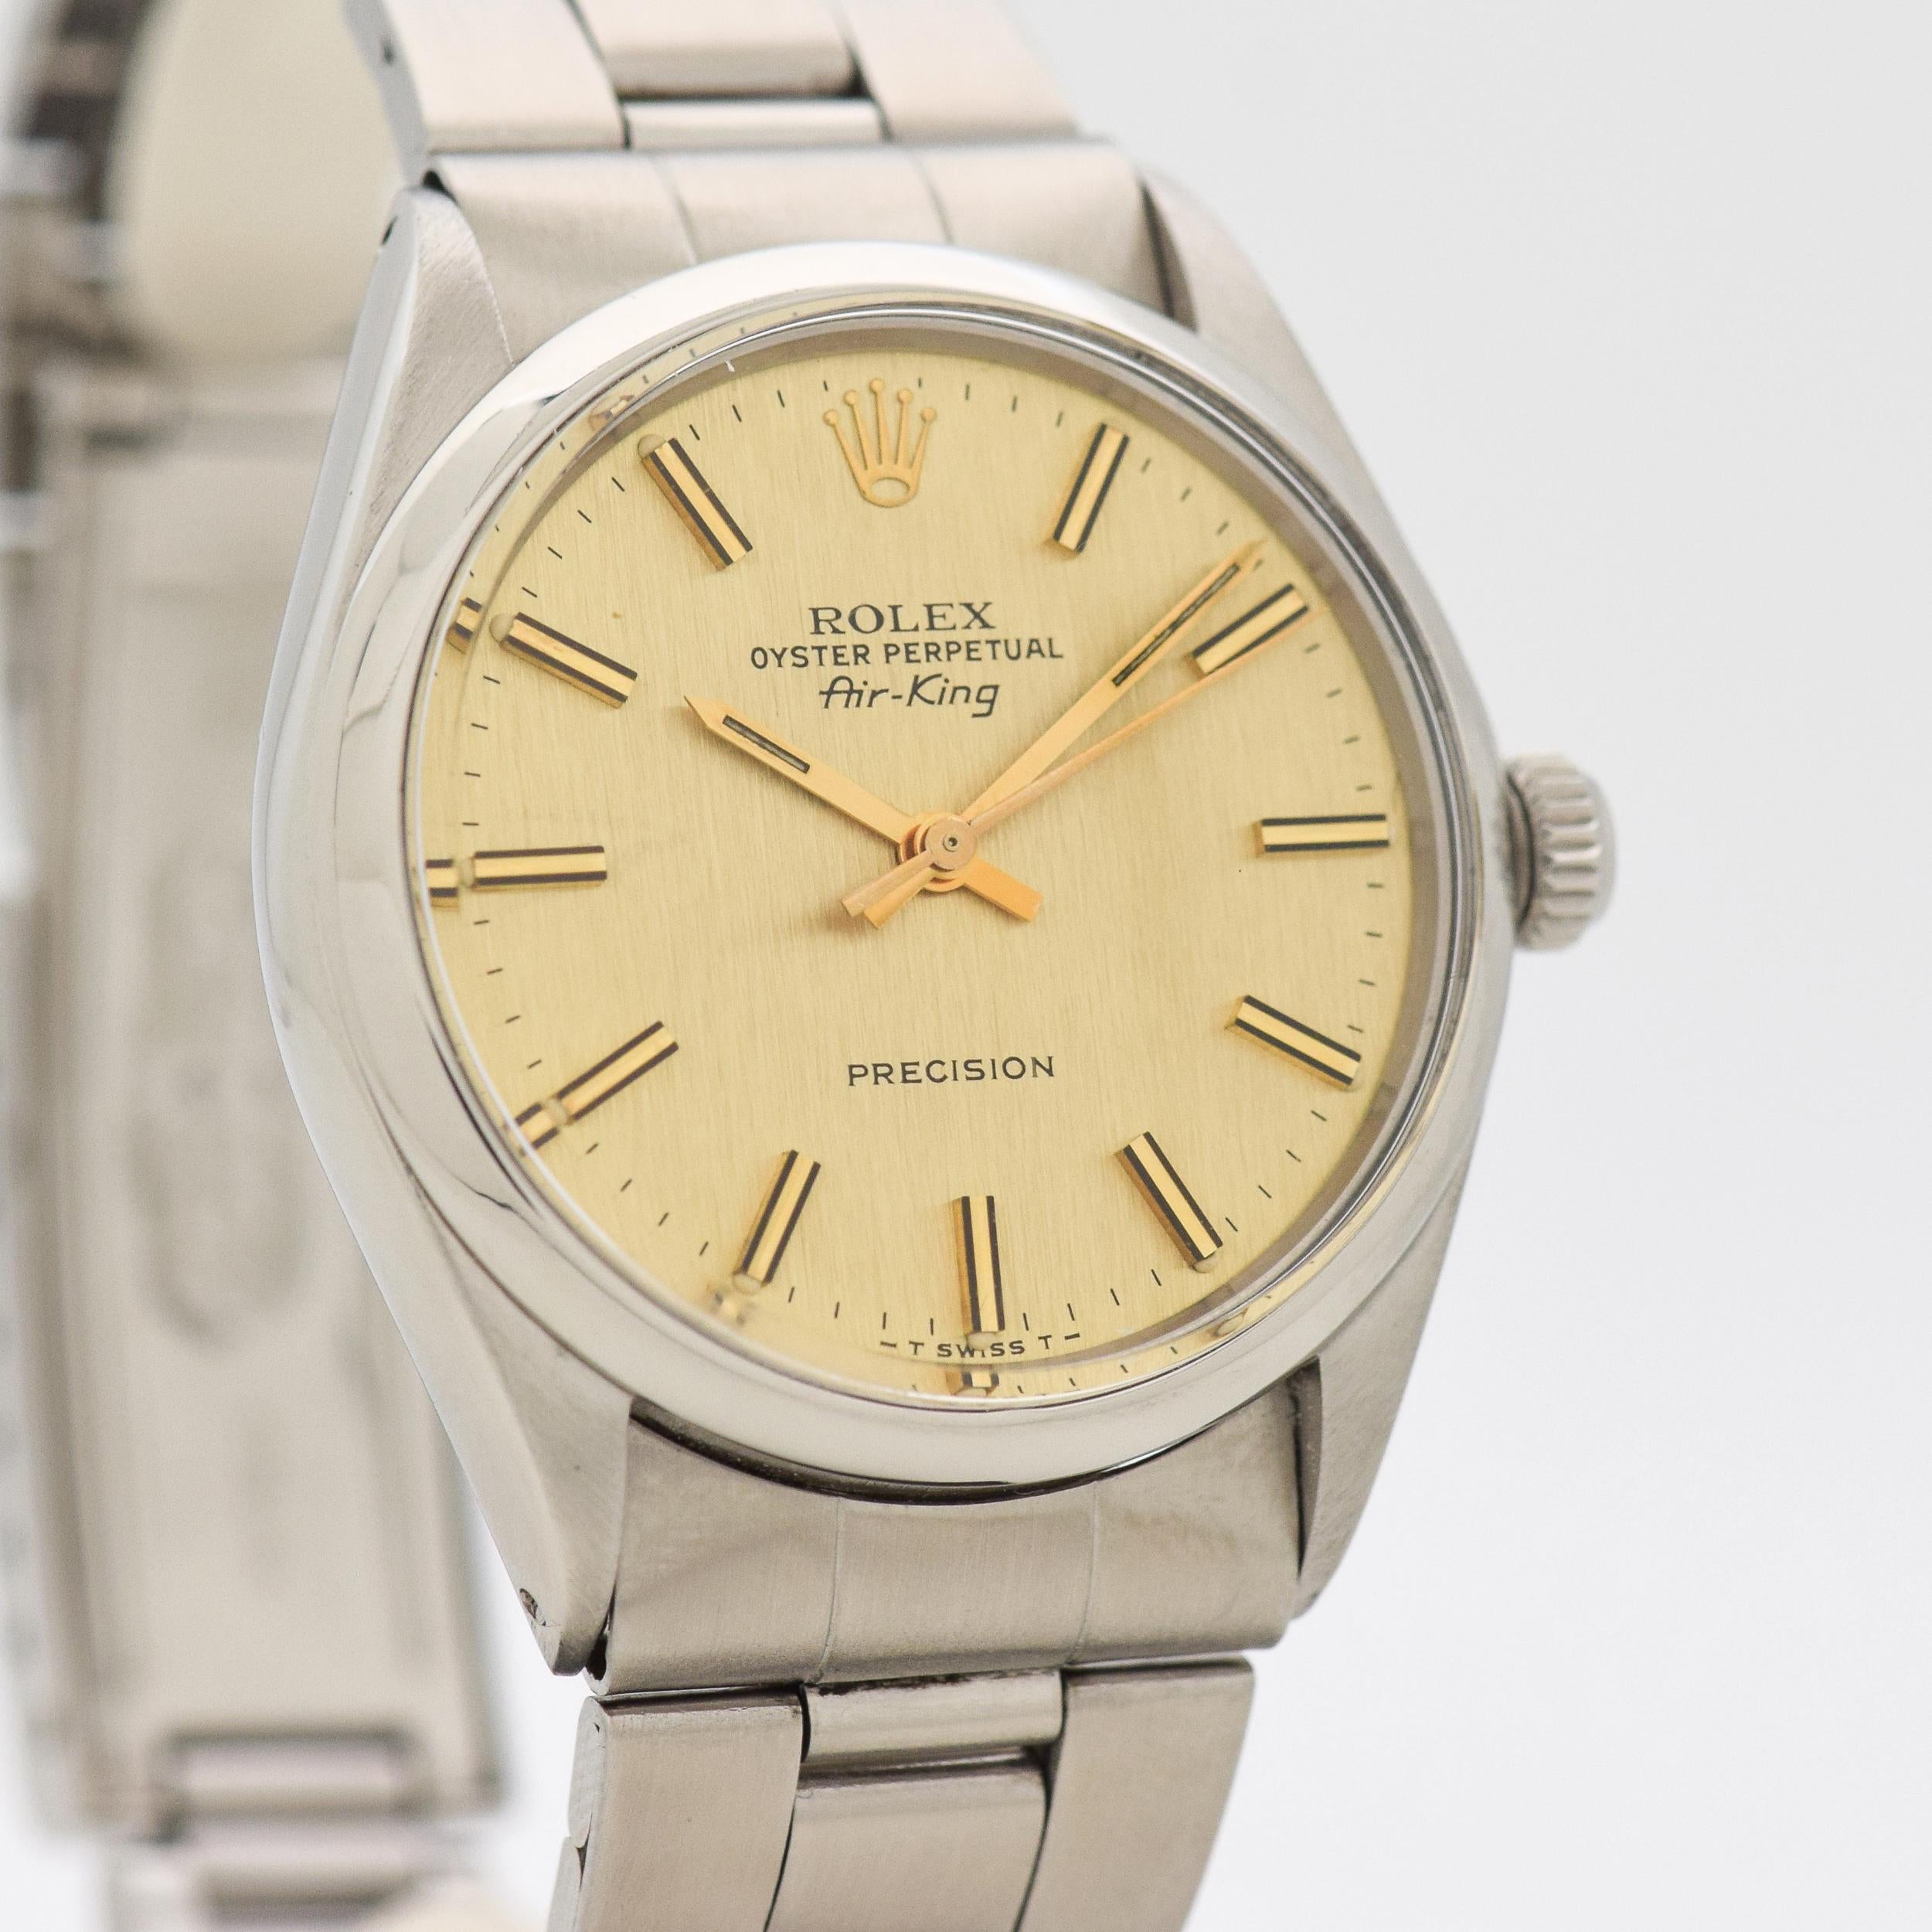 1972 Vintage Rolex Air-King Ref. 5500 Stainless Steel watch with Original RARE Unique Champagne Mildly Linen Textured Dial with Applied Gold Color Ridged Stick/Bar/Baton Markers with Original Rolex Stainless Steel Oyster Bracelet. Case size, 34mm x